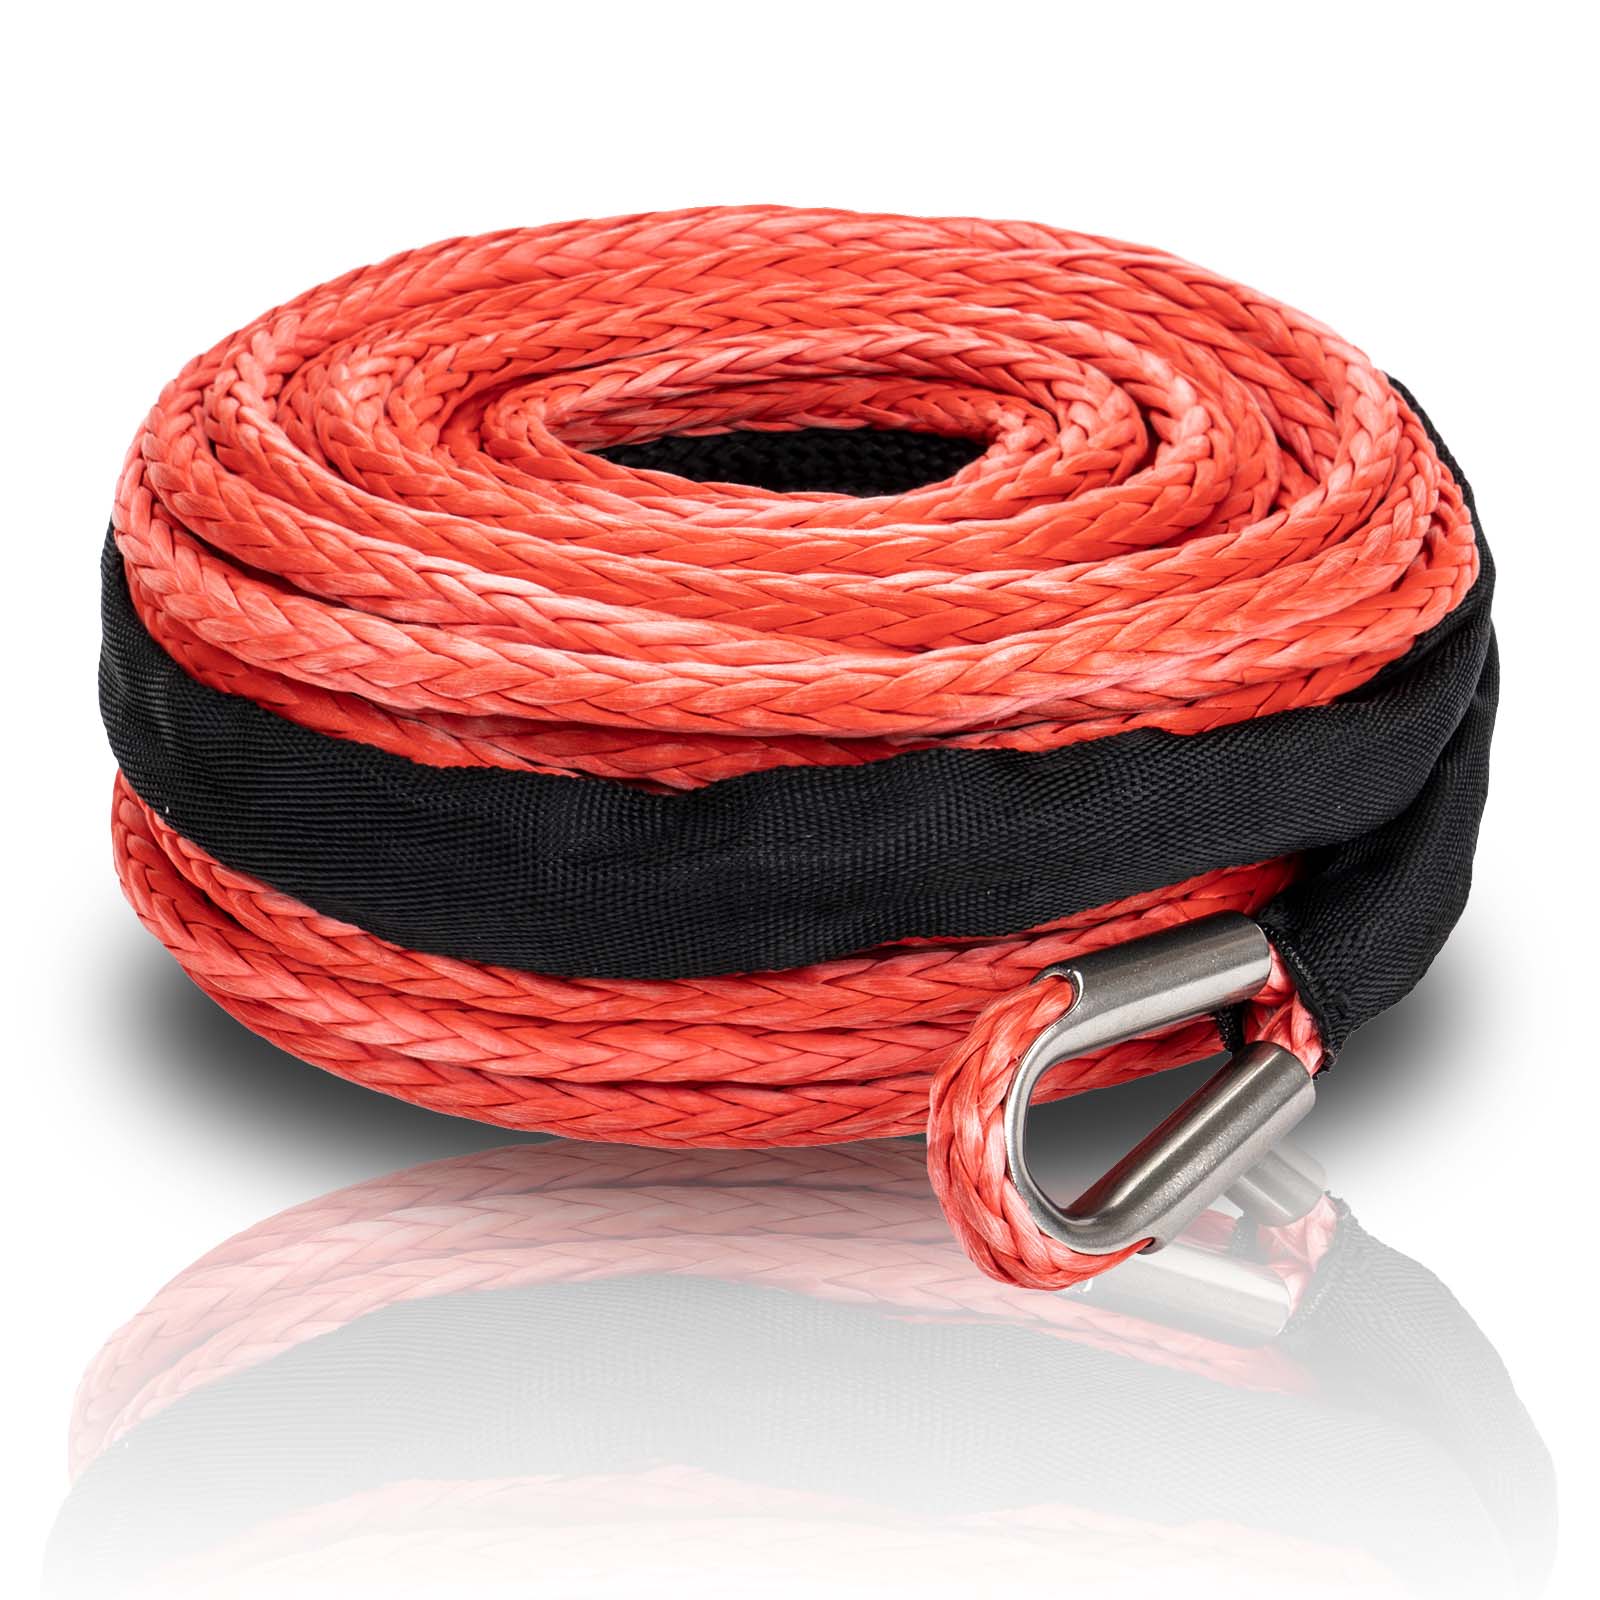 OPENROAD Synthetic Winch Rope, 3/8 x 85'-18000 LBs Winch Line